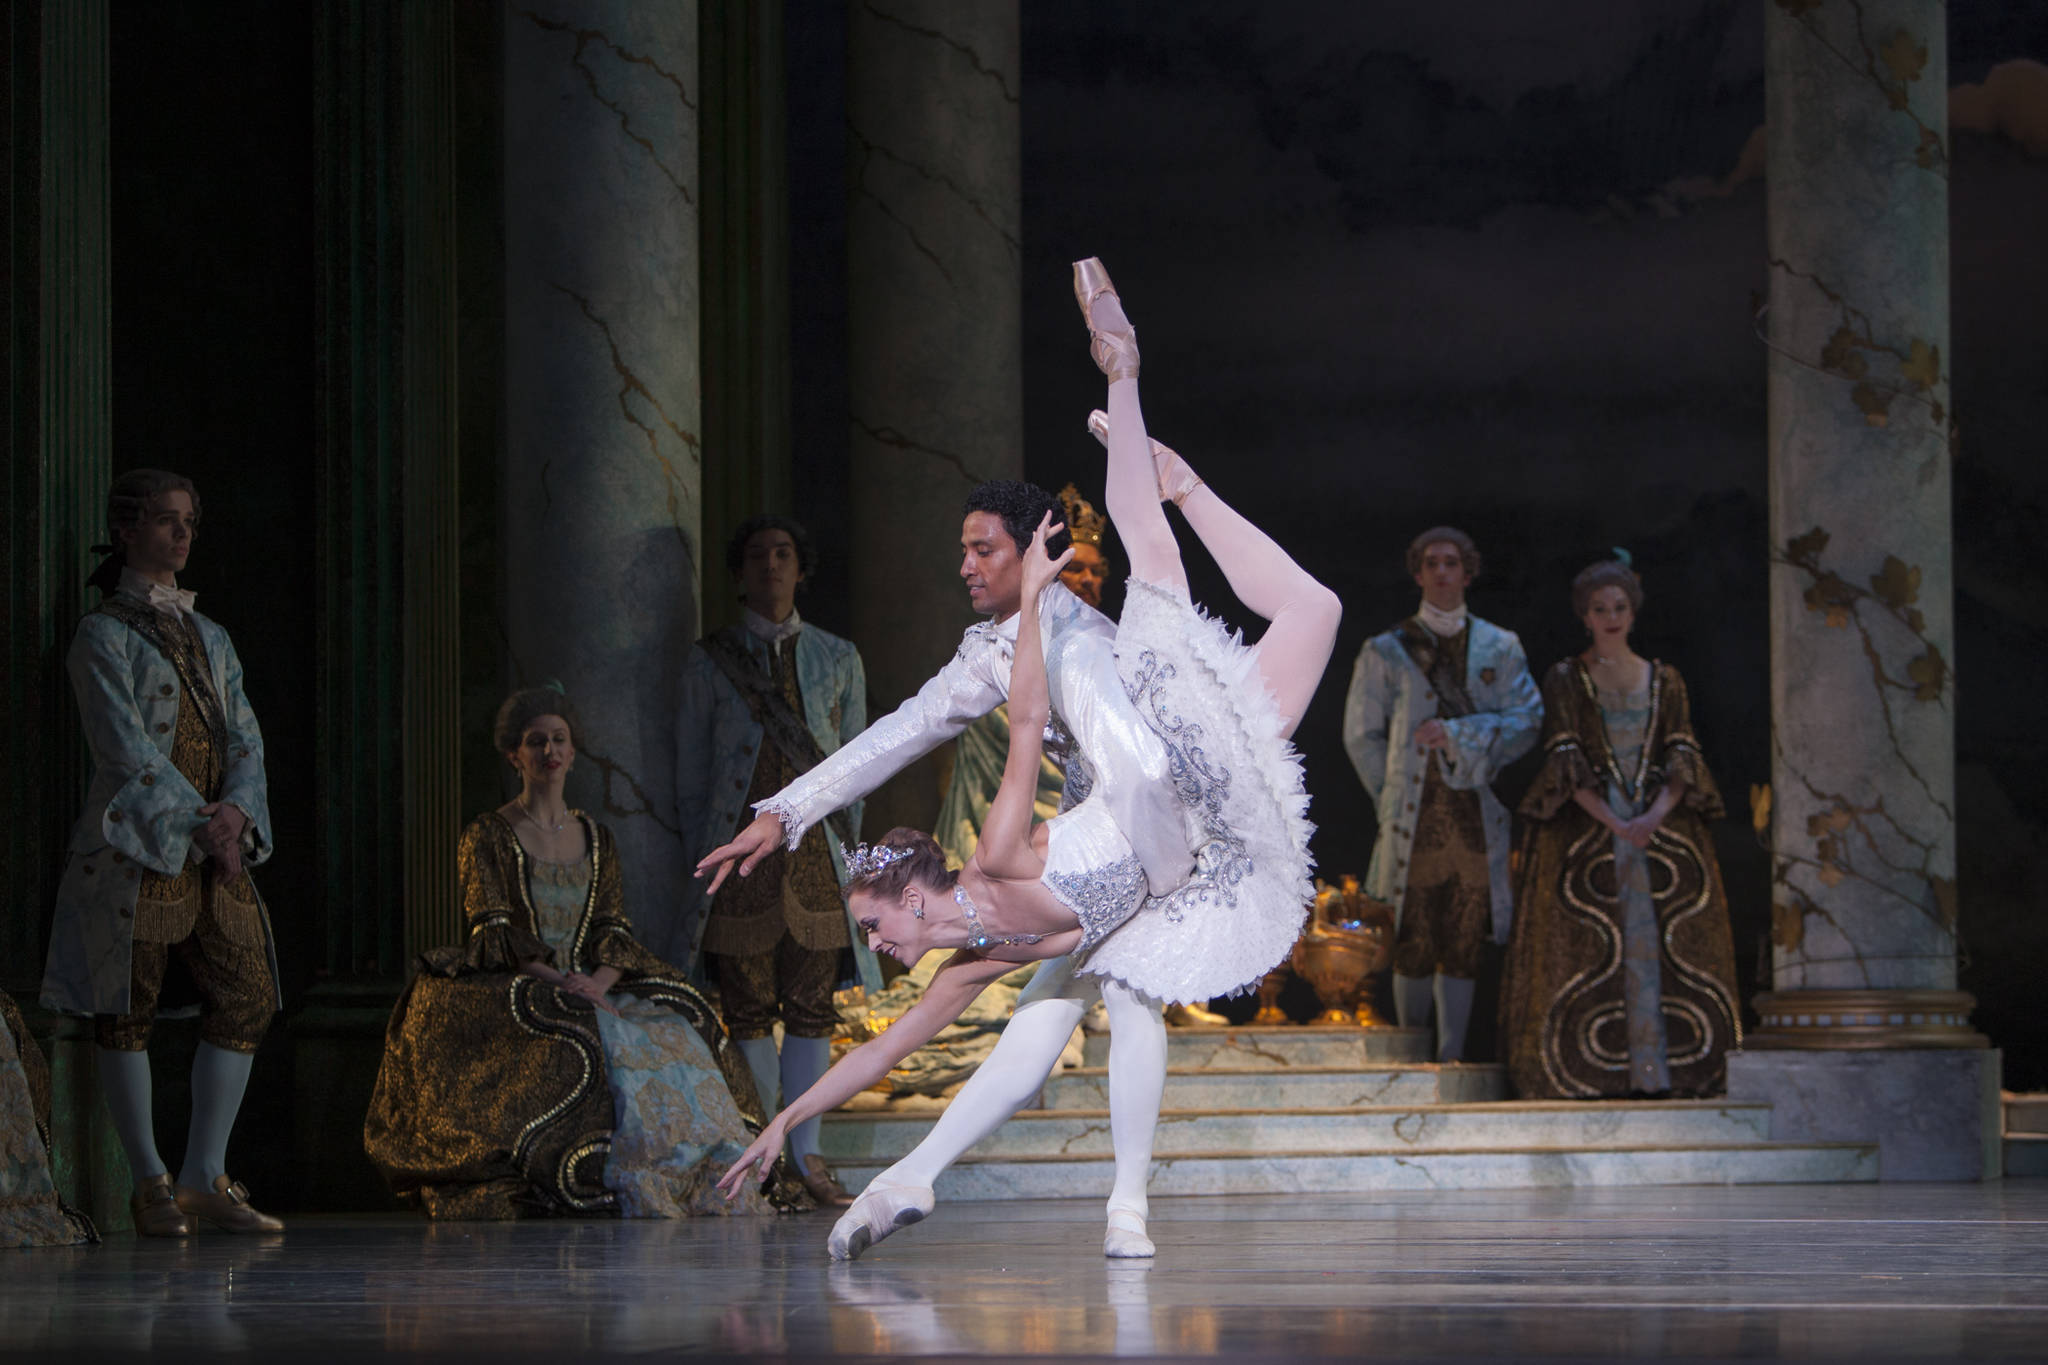 Pacific Northwest Ballet’s ‘The Sleeping Beauty’ also includes plenty of dancing beauty. Photo by Angela Sterling